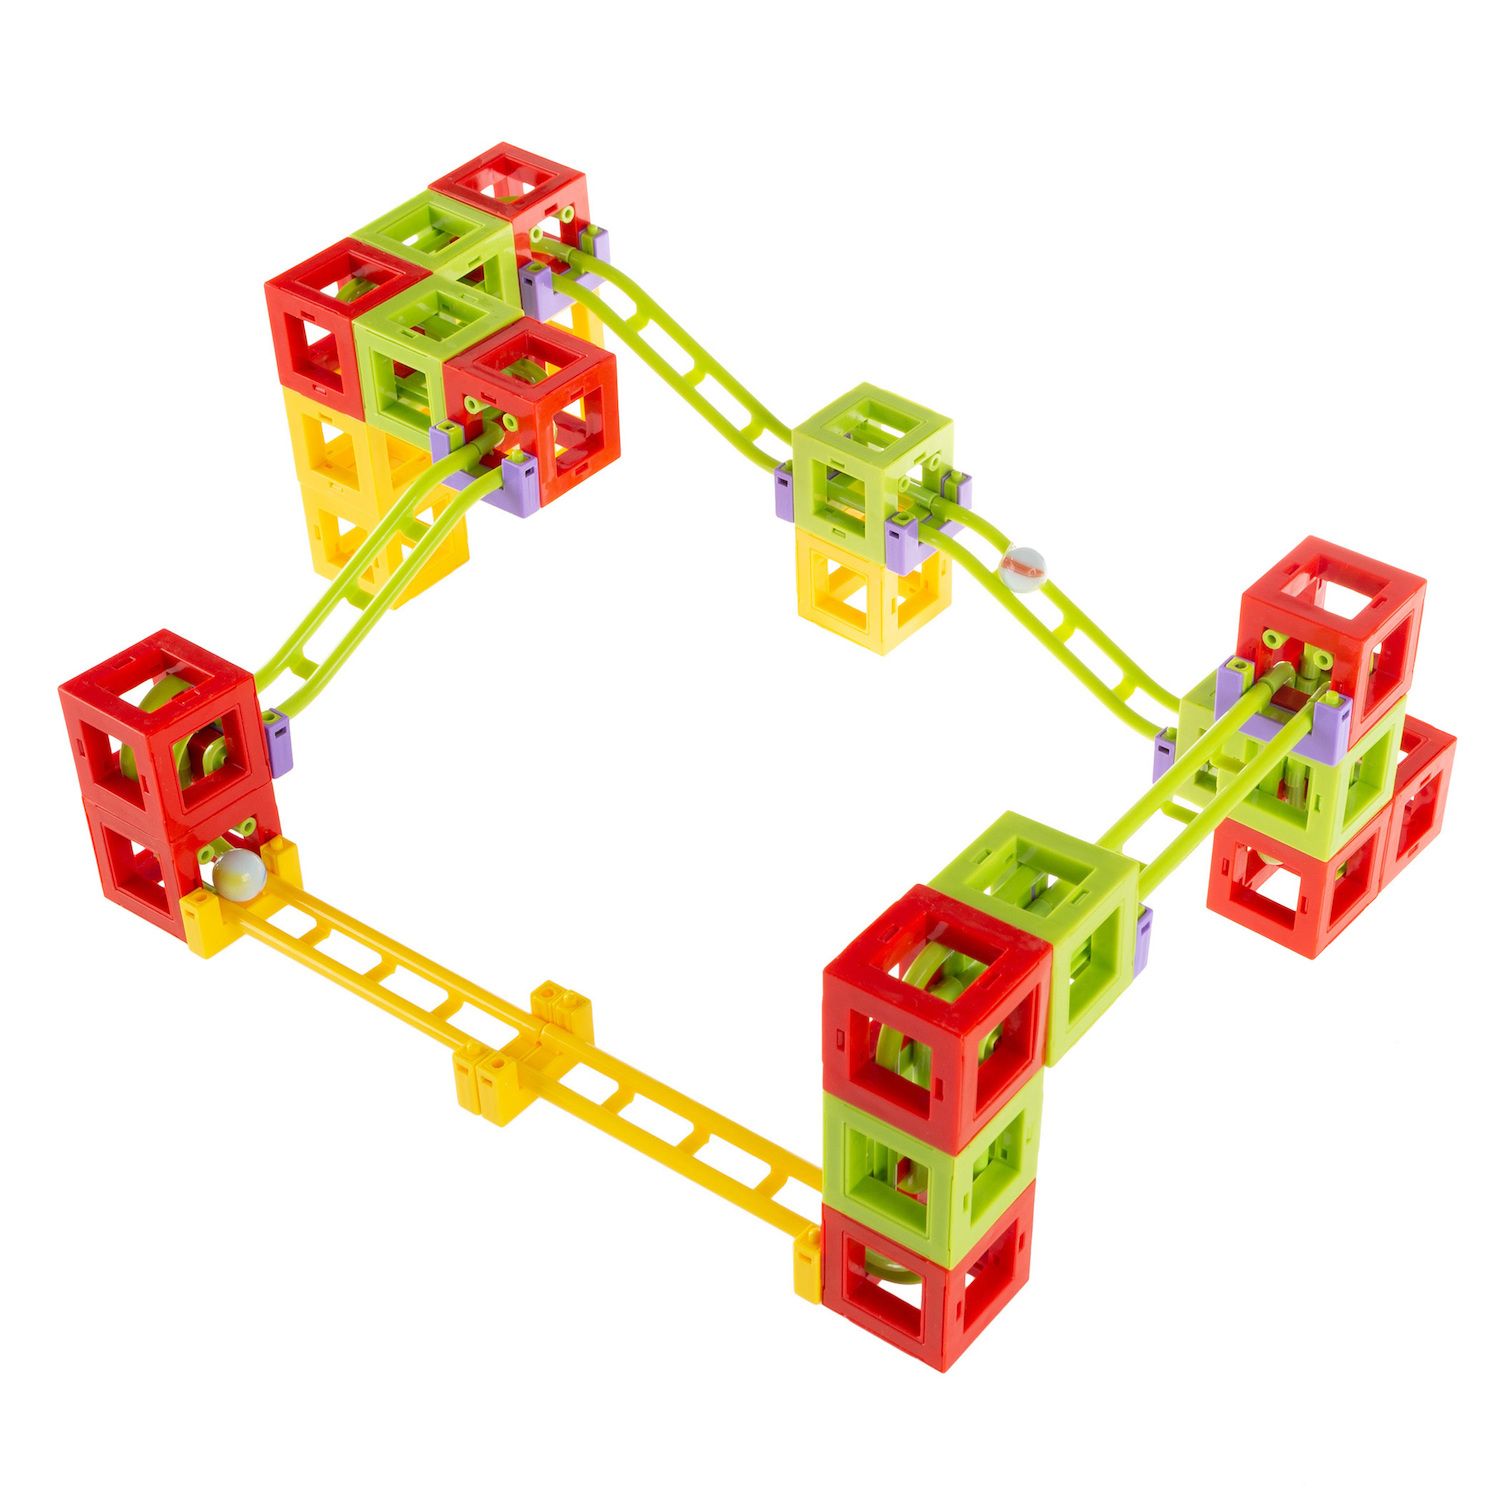 Image for Hey! Play! Magnetic 3D Block Marble Run Set at Kohl's.